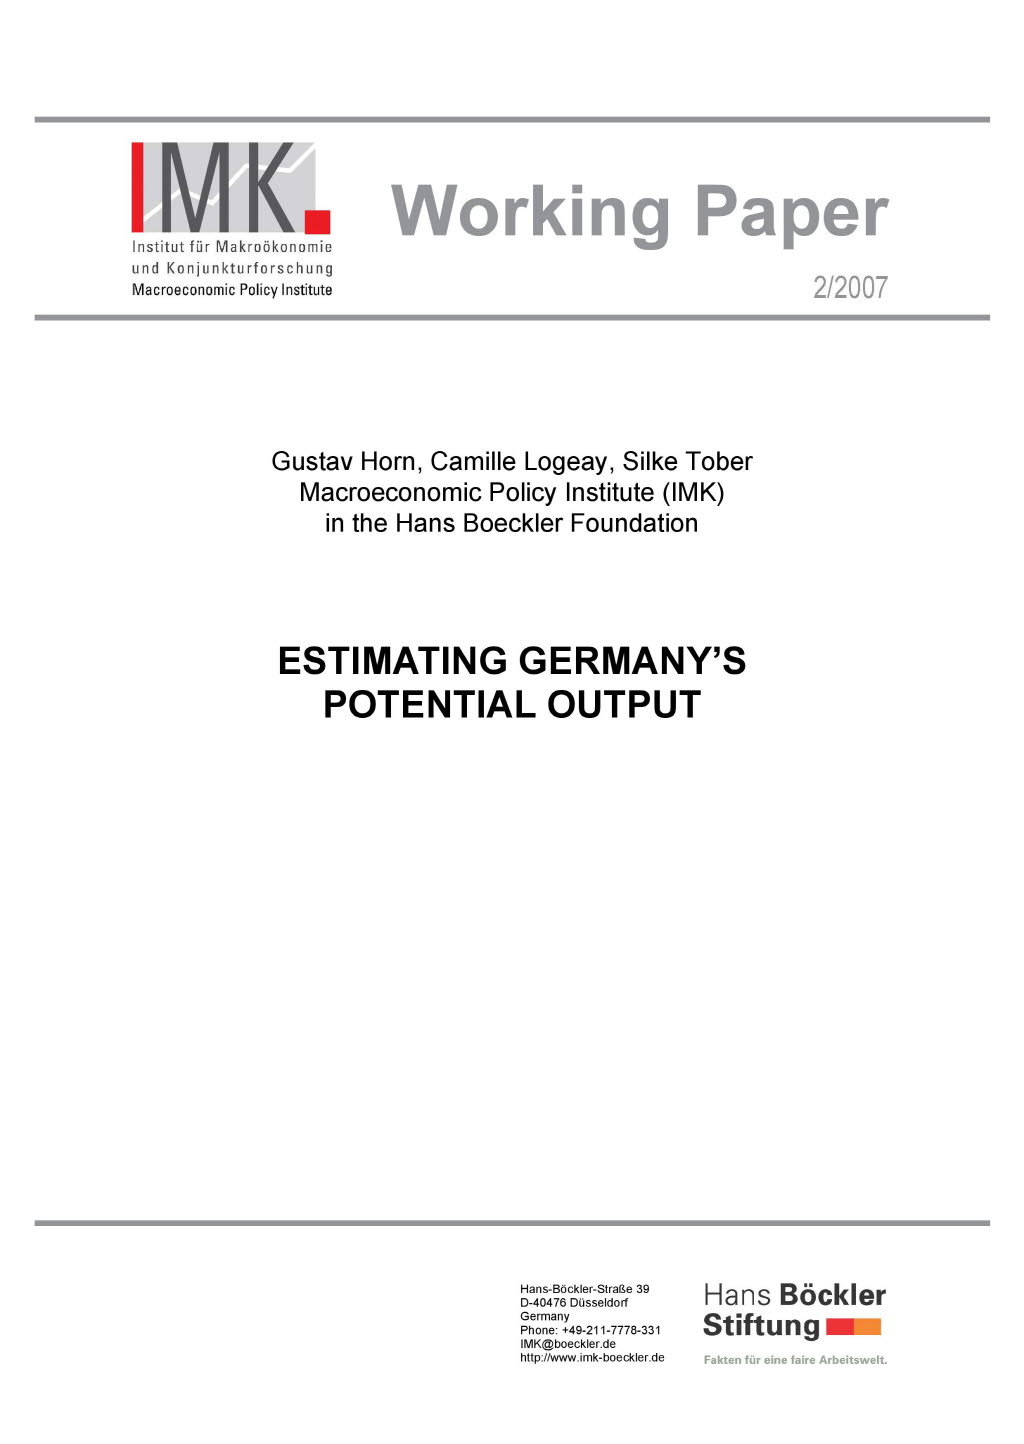 Estimating Germany´s Potential Output